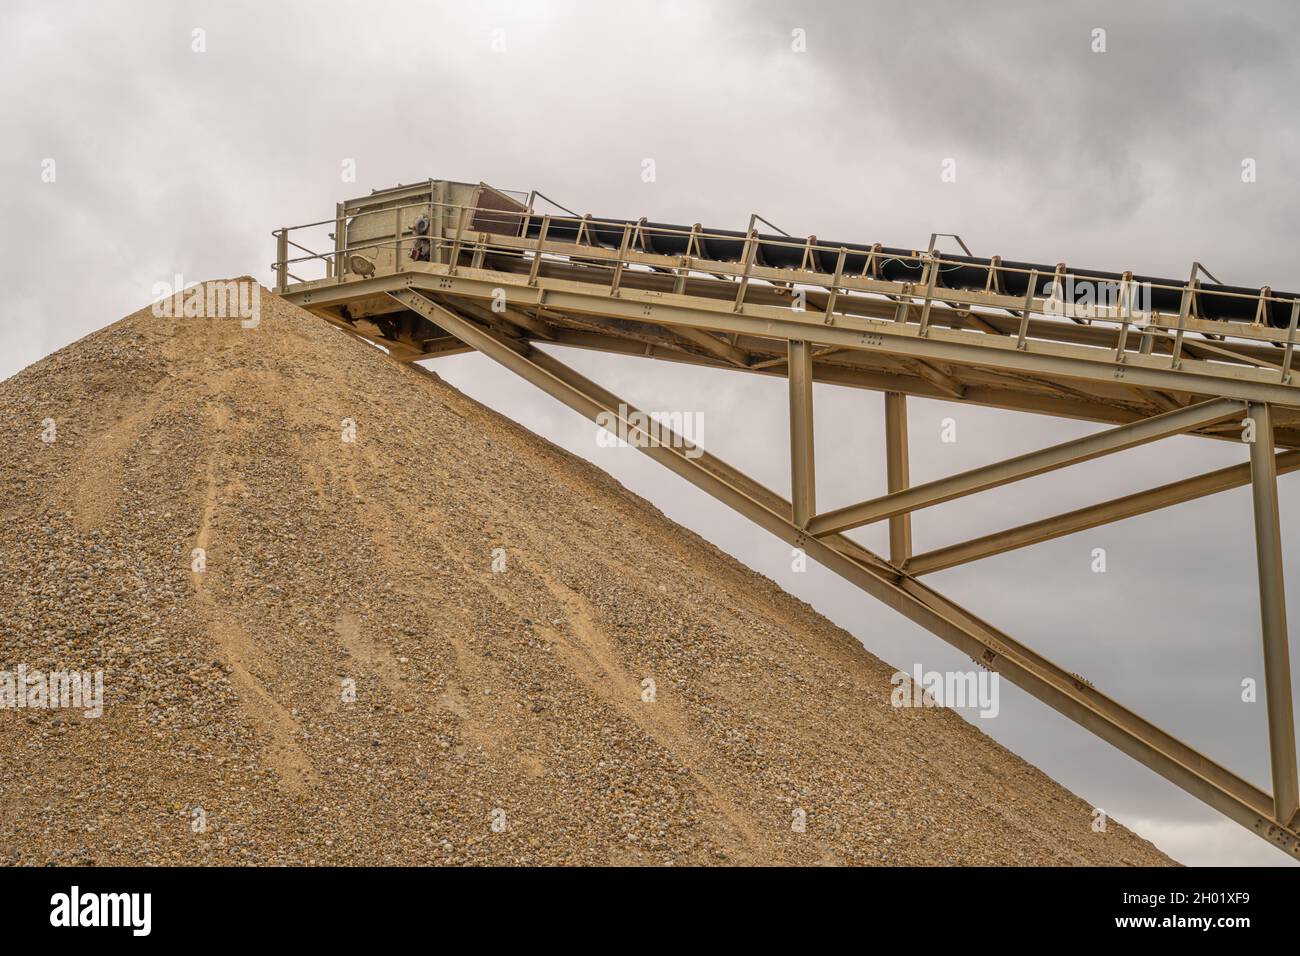 Agregates and conveyor belt at Cliffe on the banks of the Thames in Kent. Stock Photo